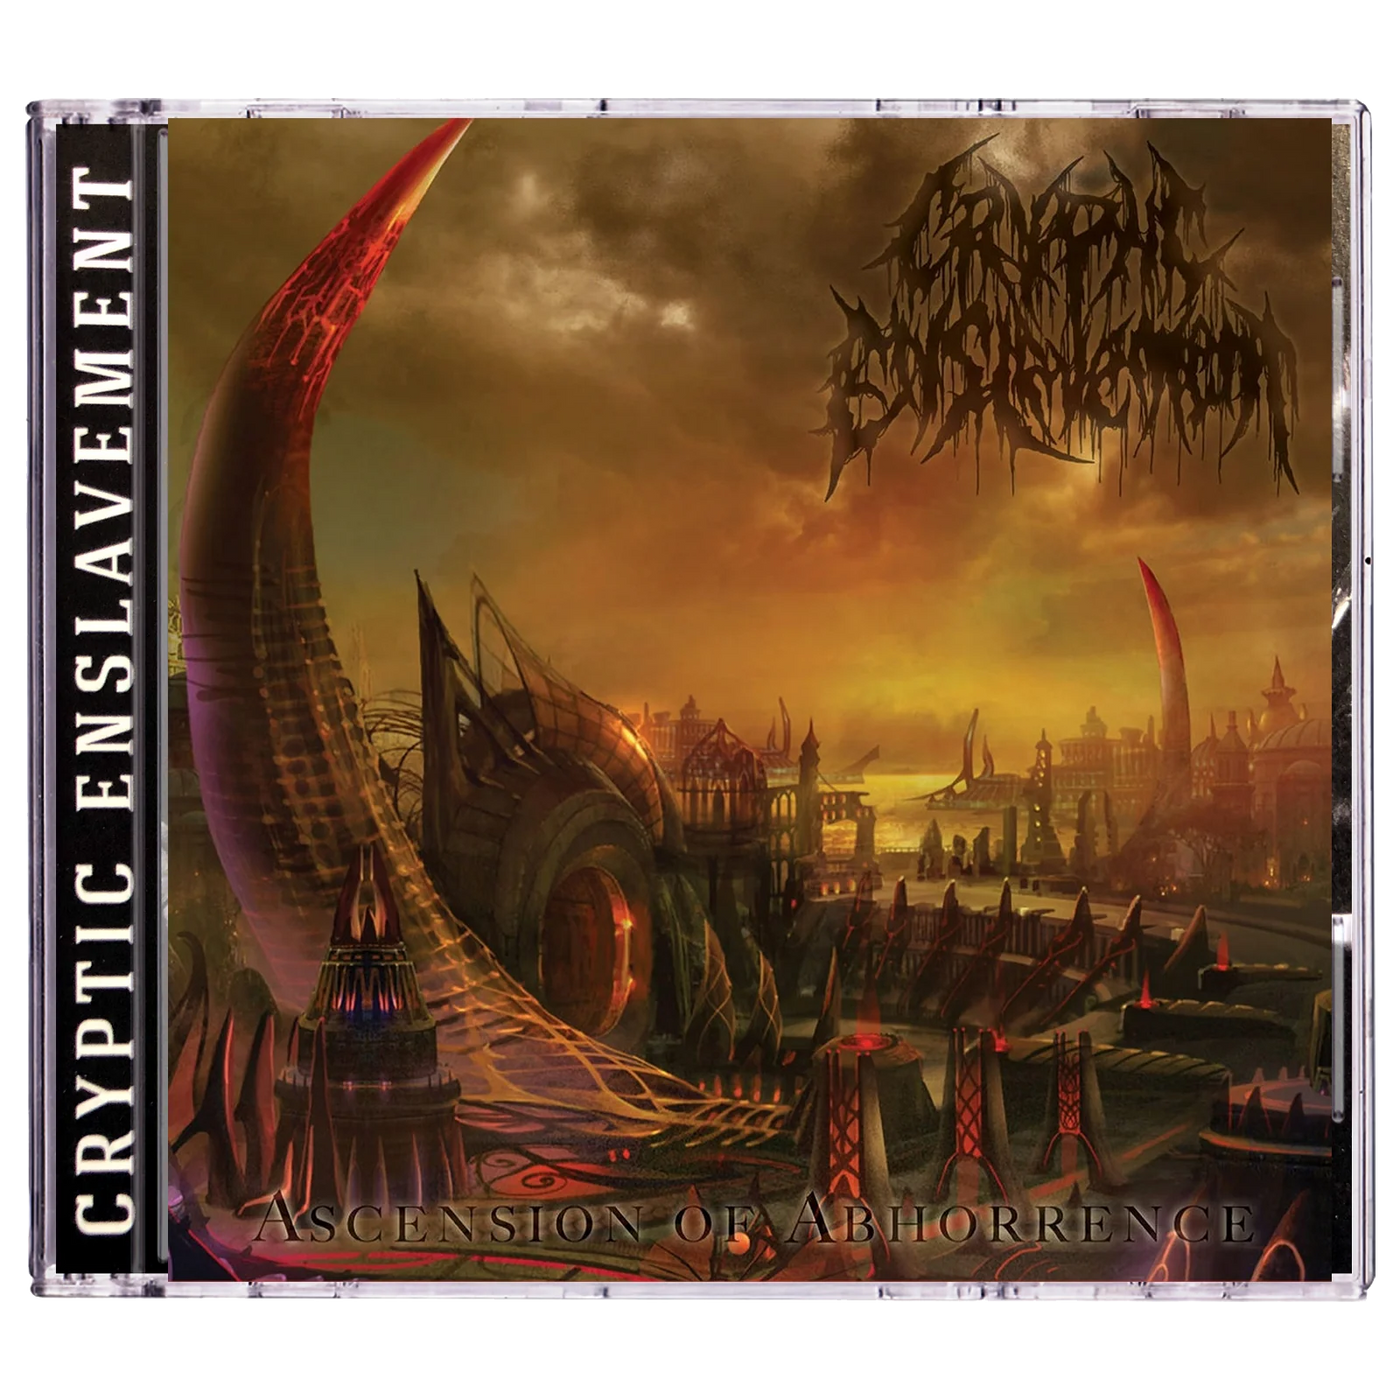 Cryptic Enslavement 'Ascension of Abhorrence' CD